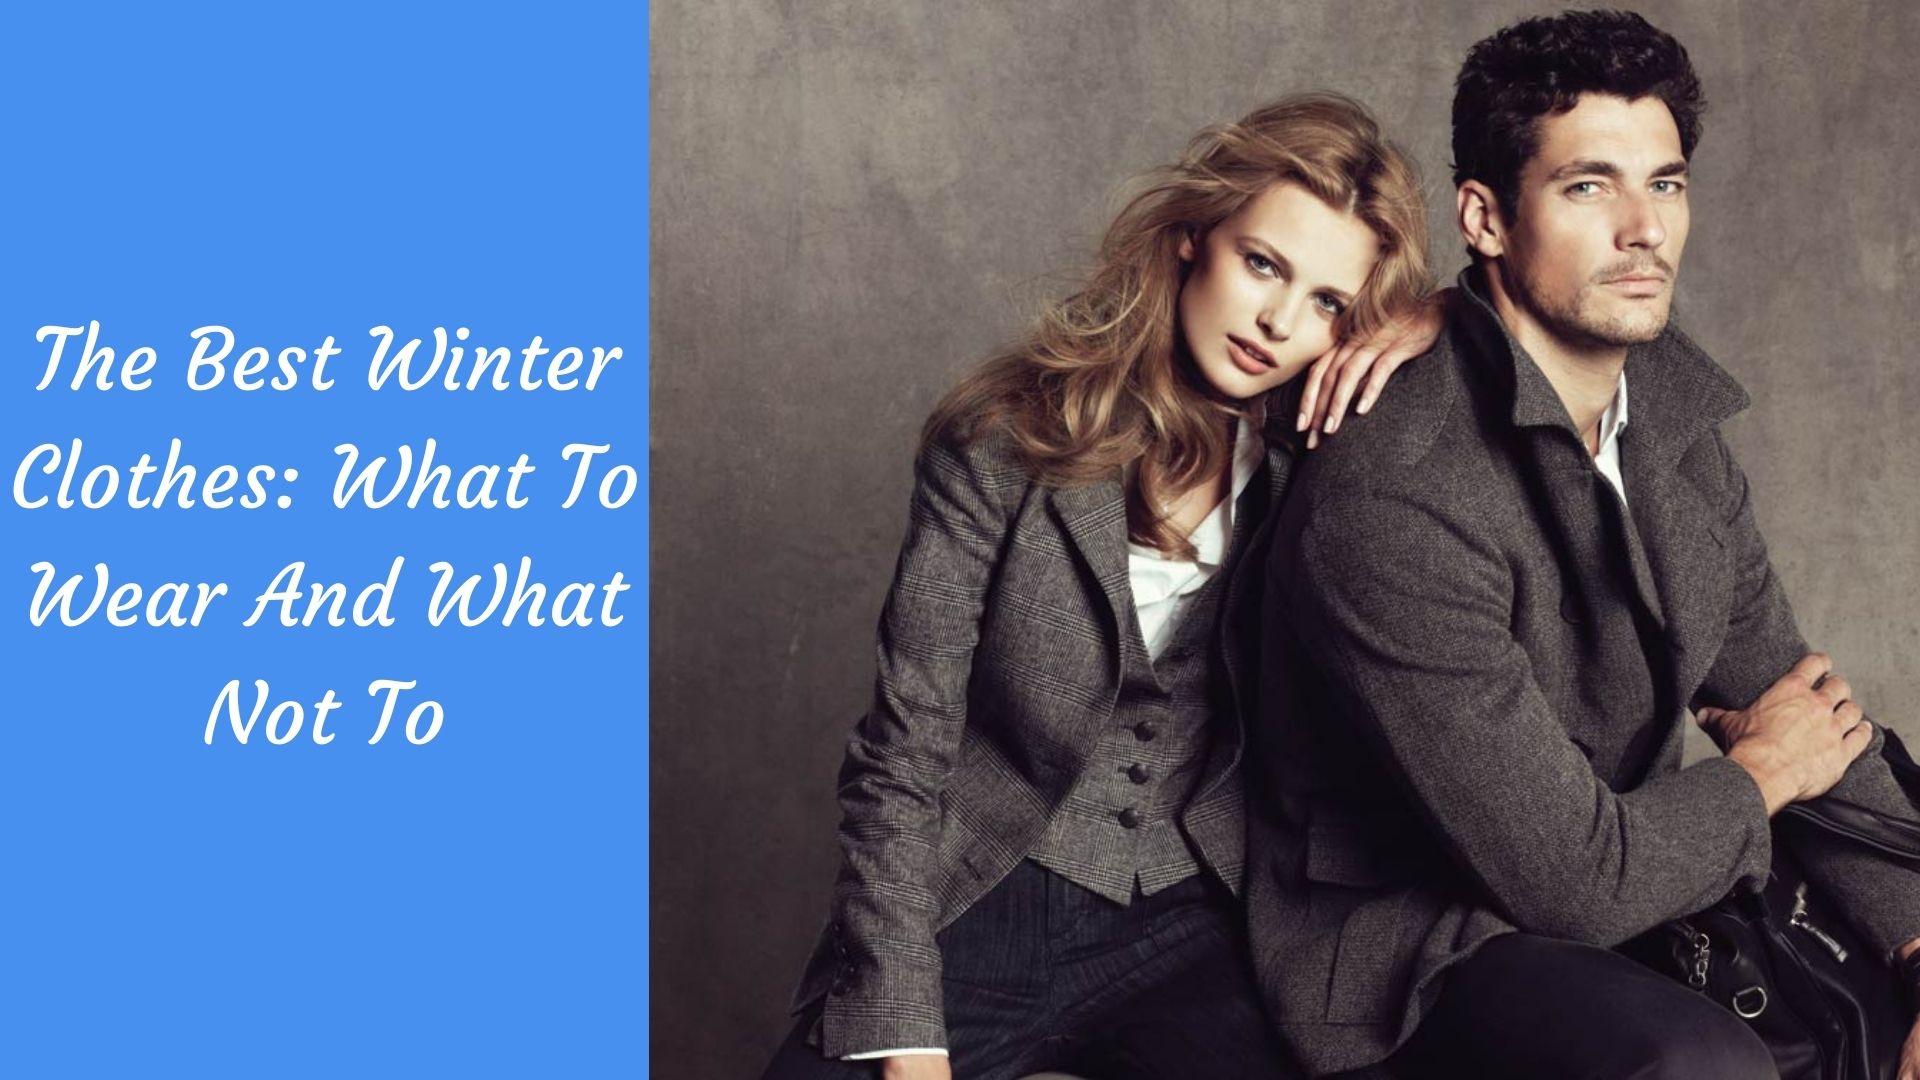 The Best Winter Clothes: What To Wear And What Not To - The Kosha Journal